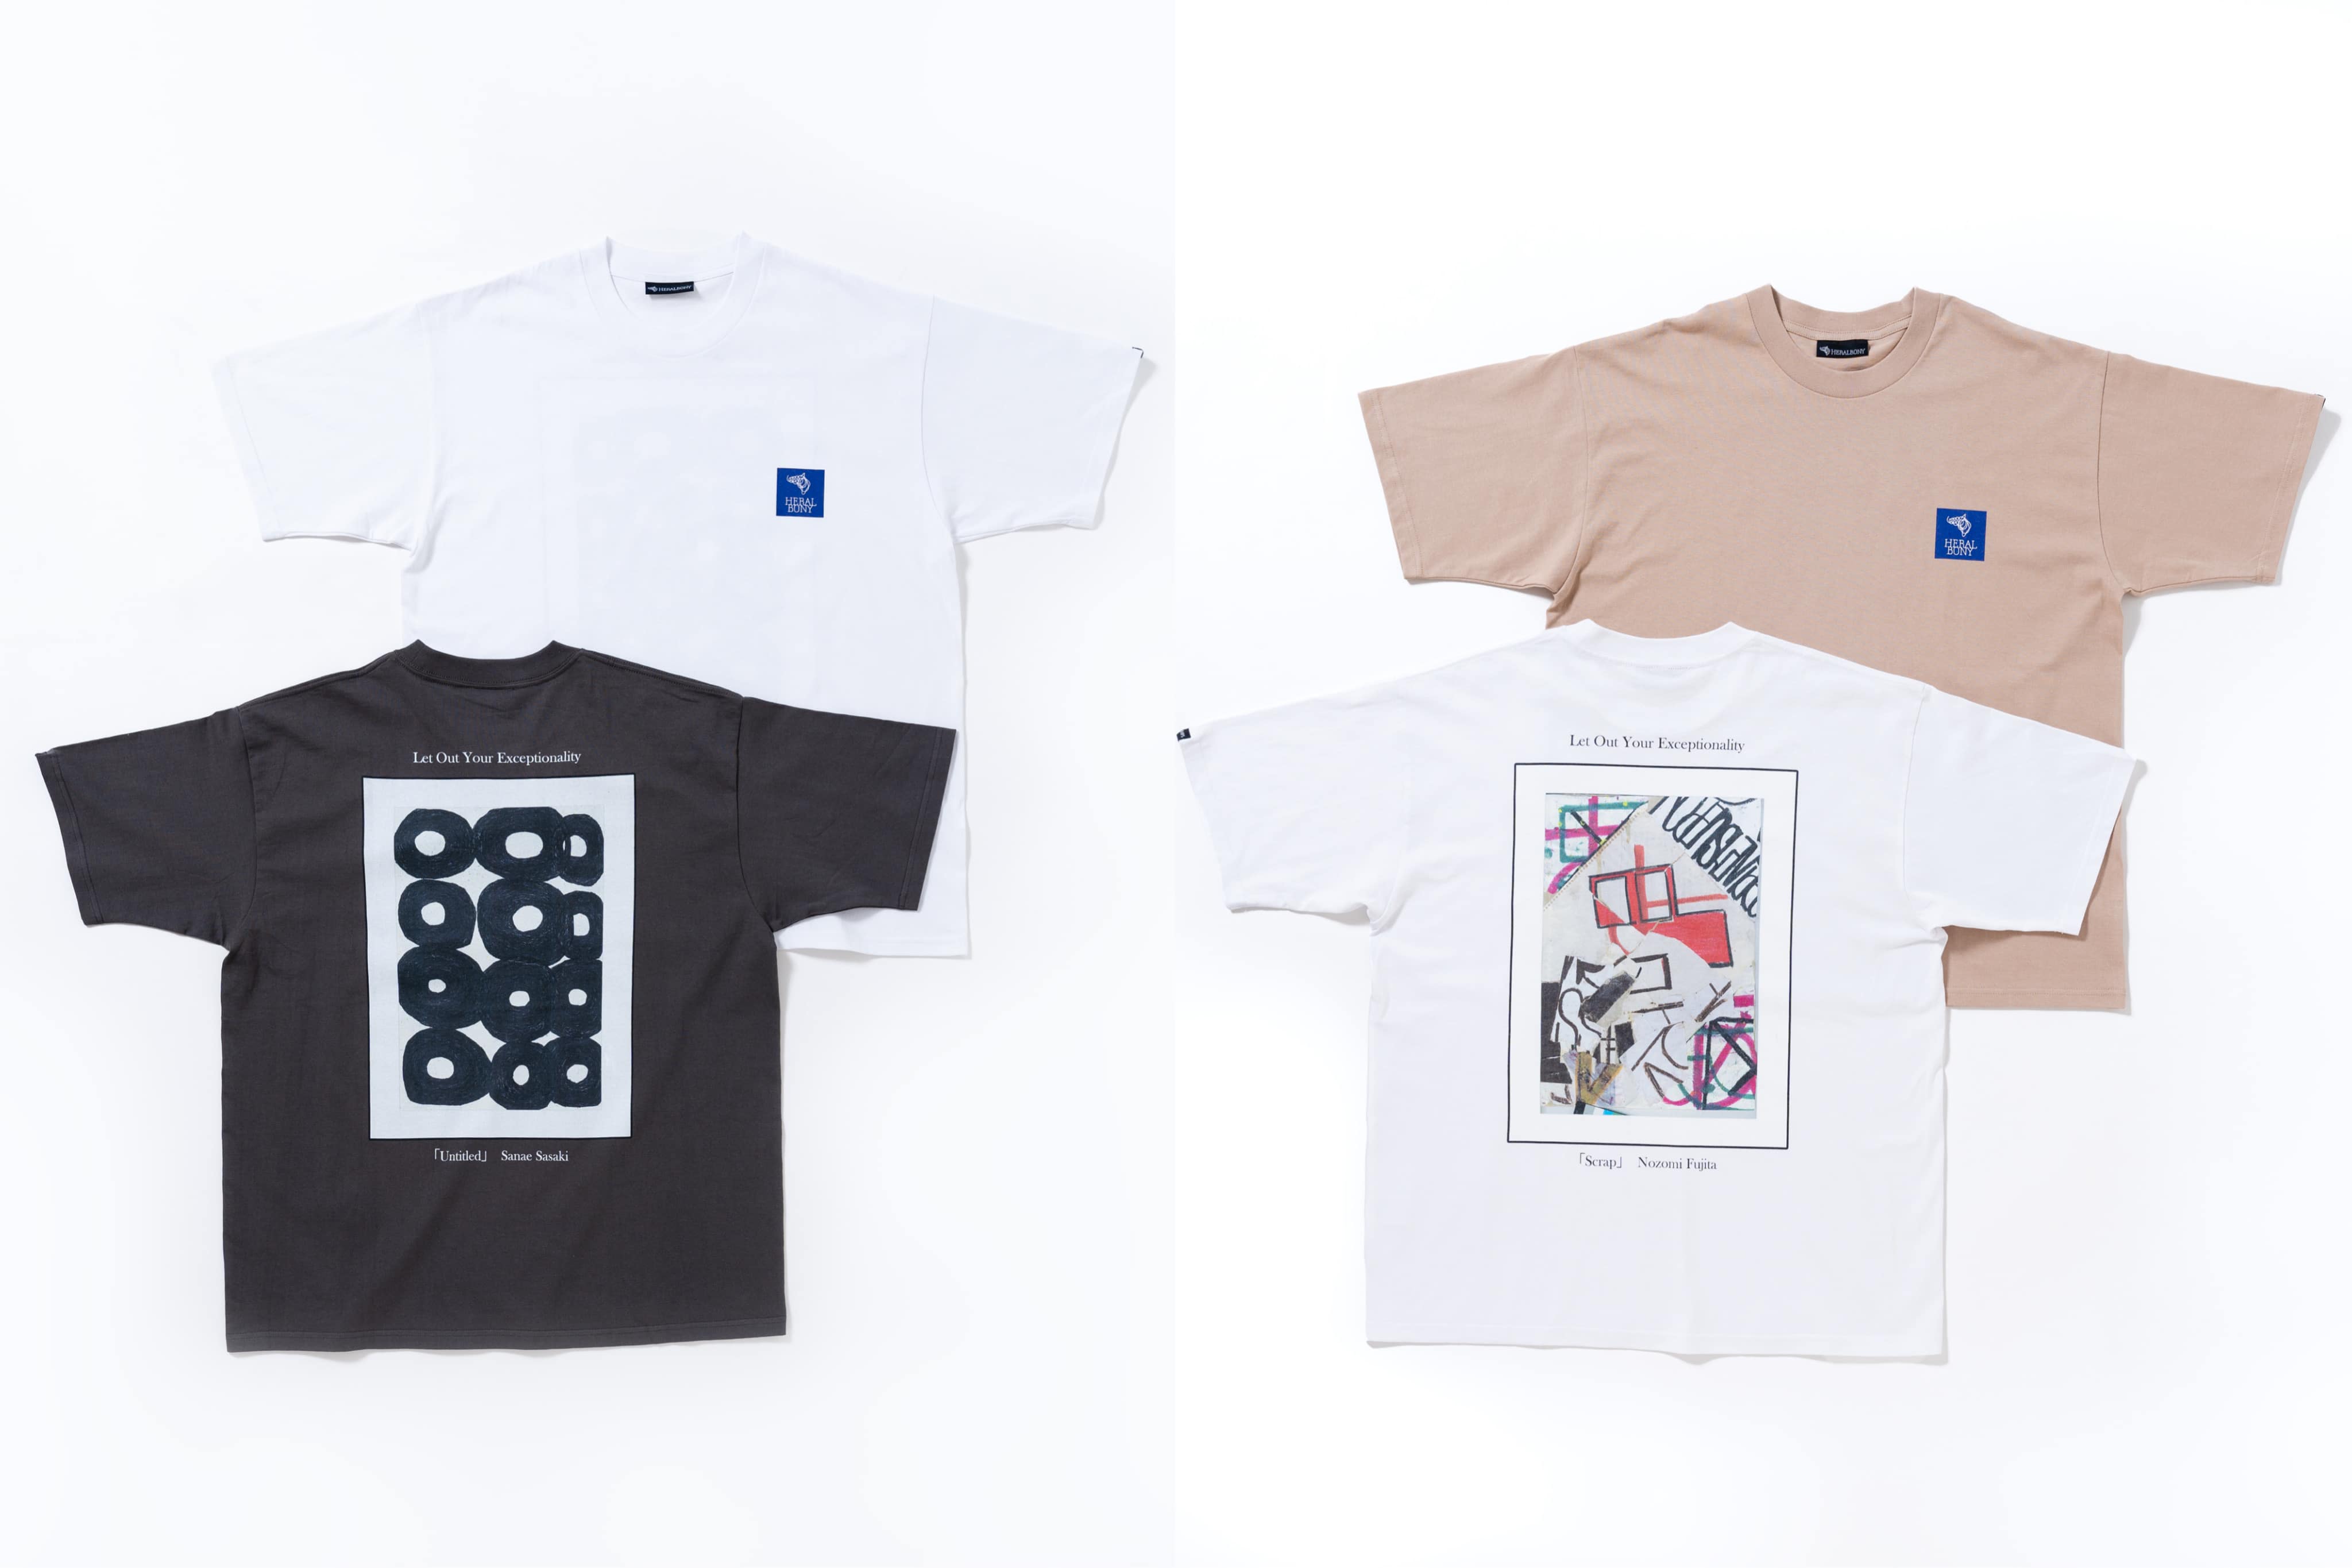 Ryokotomo - 3ca9a7b0 art lifestyle brand heralbony to collaborate with clothing shop ships